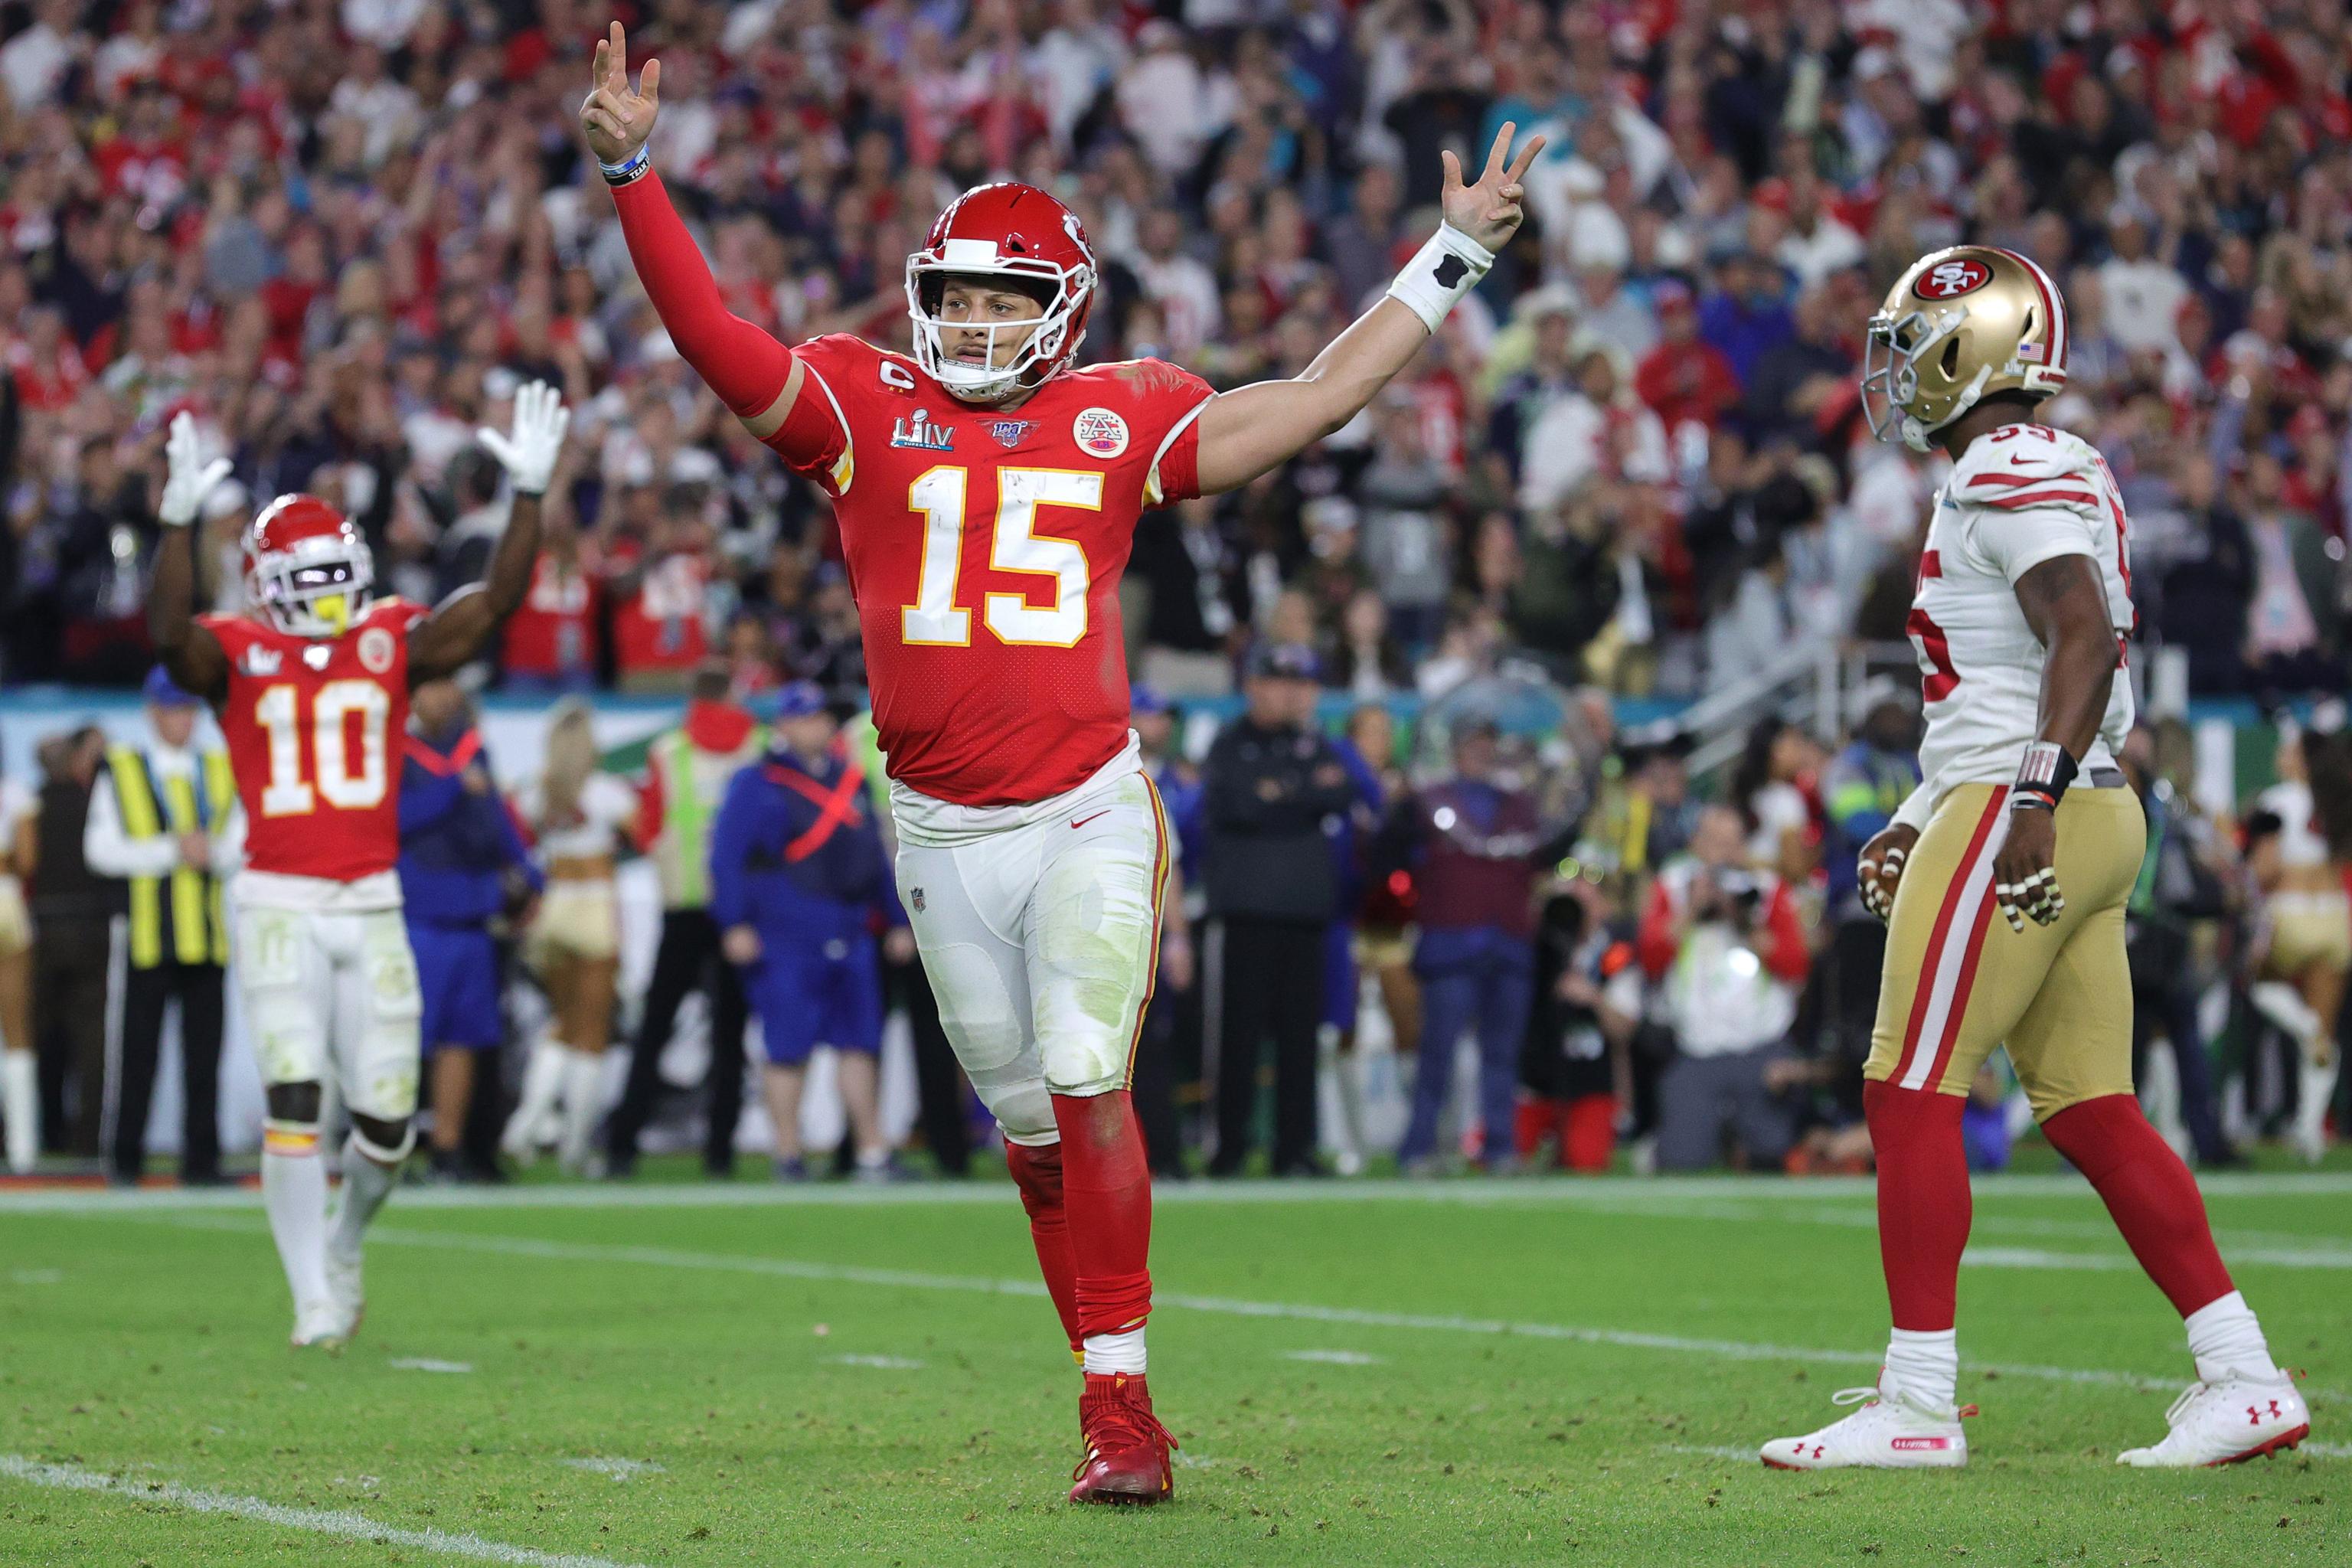 Mahomes leads Chiefs to SuperBowl LIV victory over 49ers